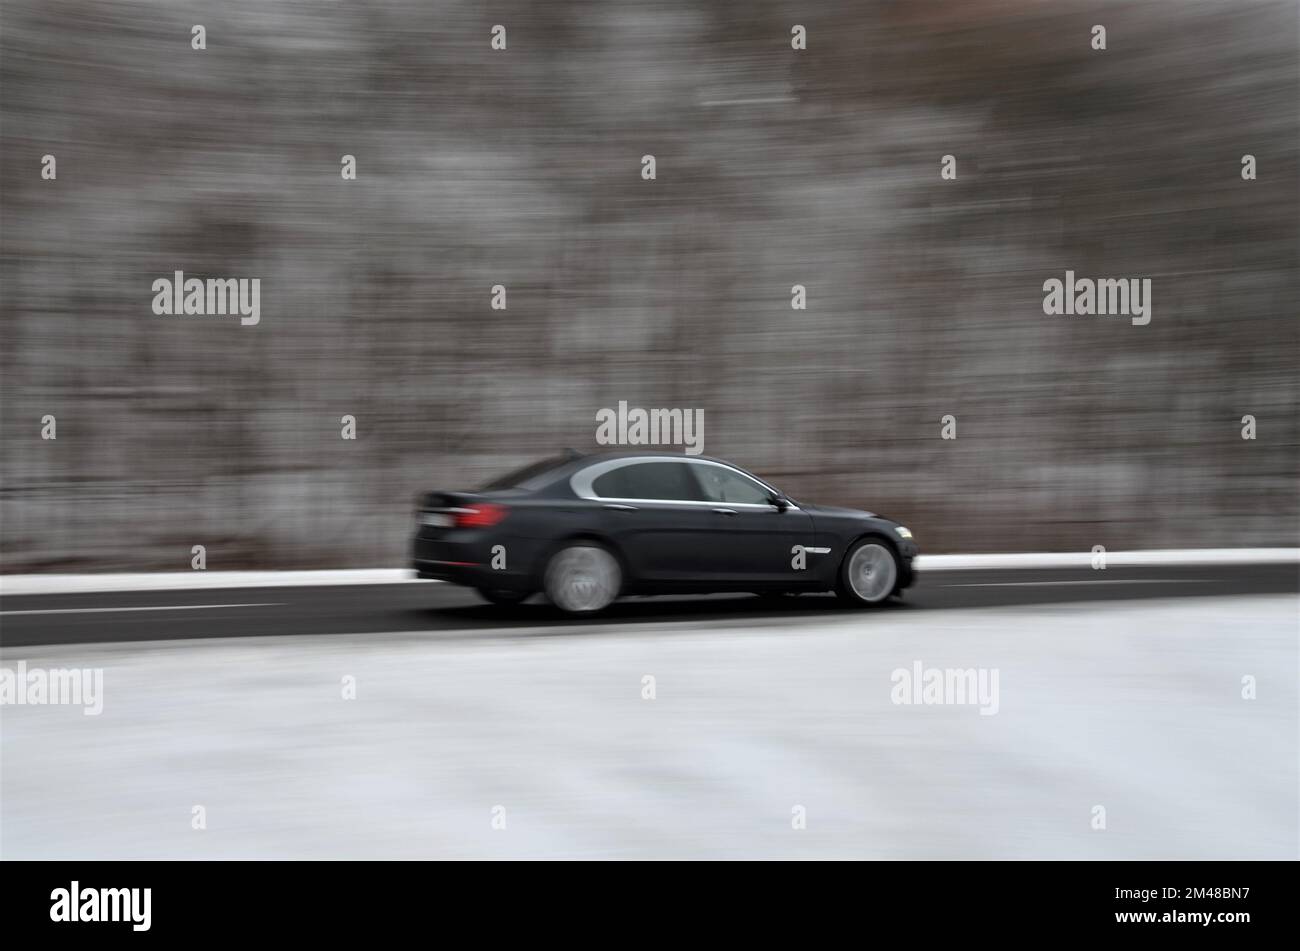 Car panning. Road beside woods. Speed around 60m/h. Stock picture. Stock Photo